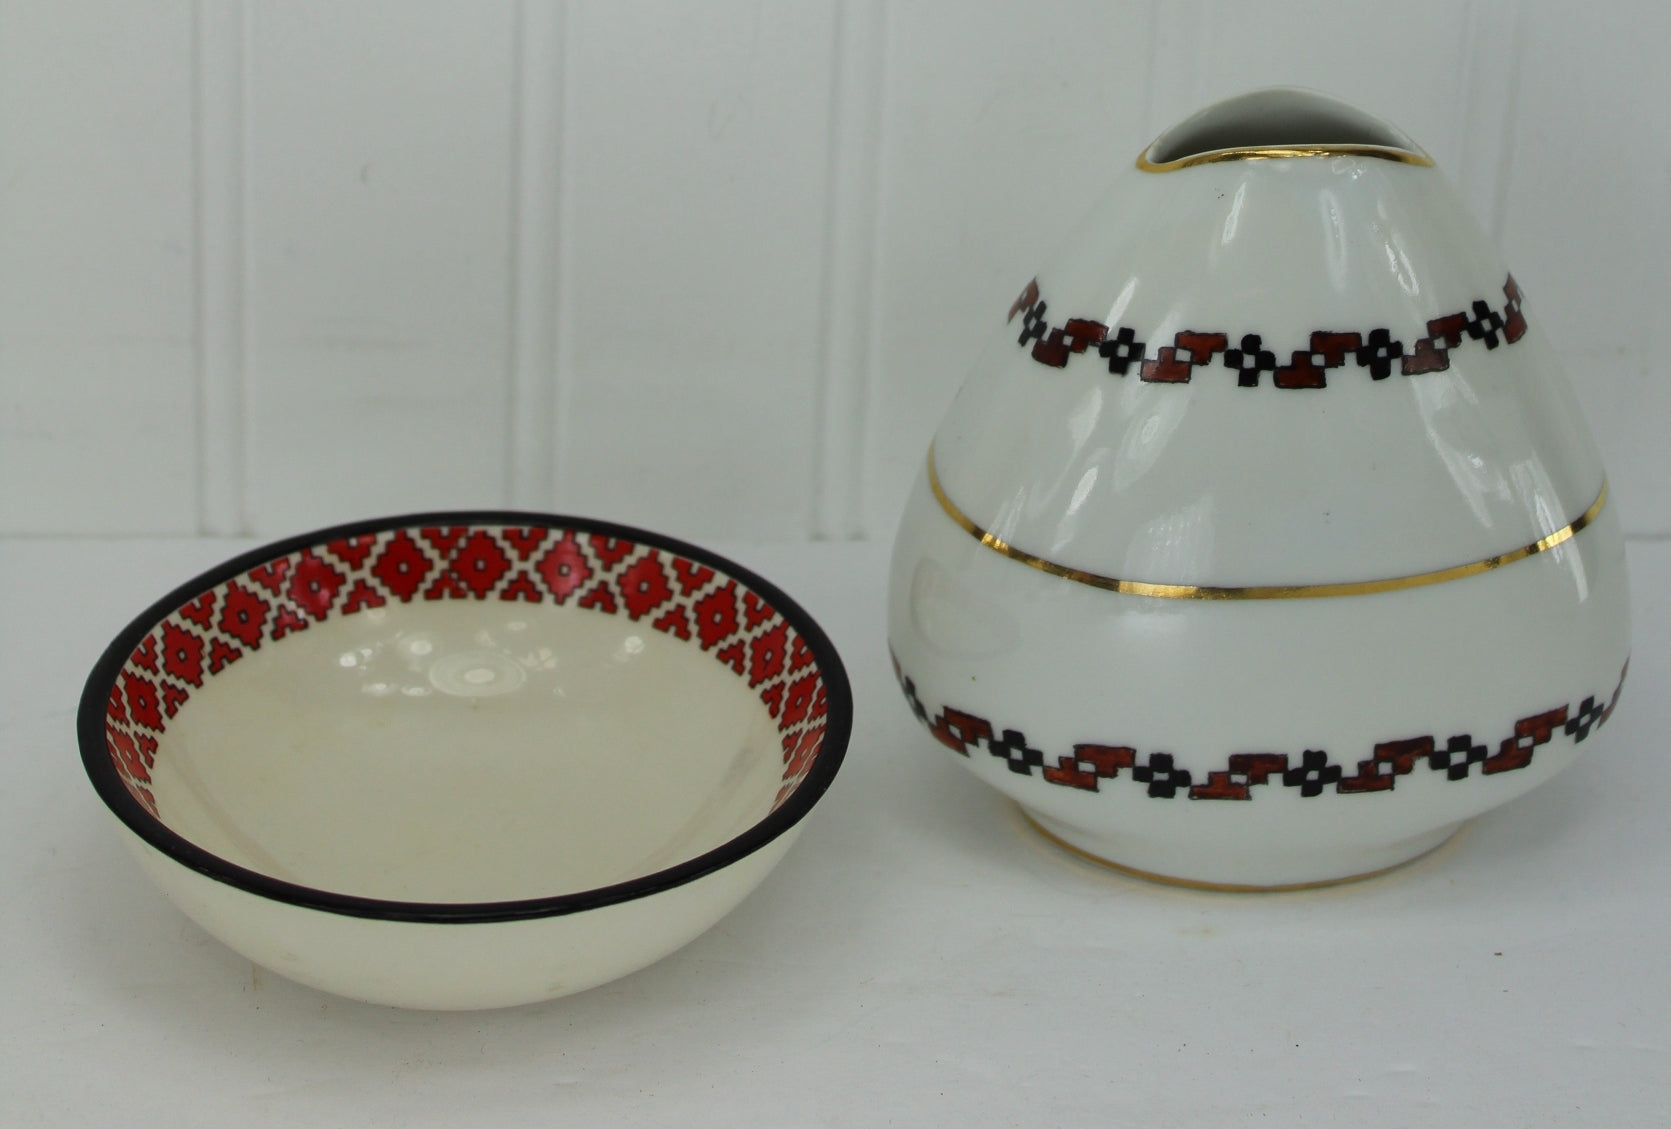 Traditional Pottery Bowl & Porcelain Unusual Porcelain Vase Brazil Estate Opera Singer shades red with black on which